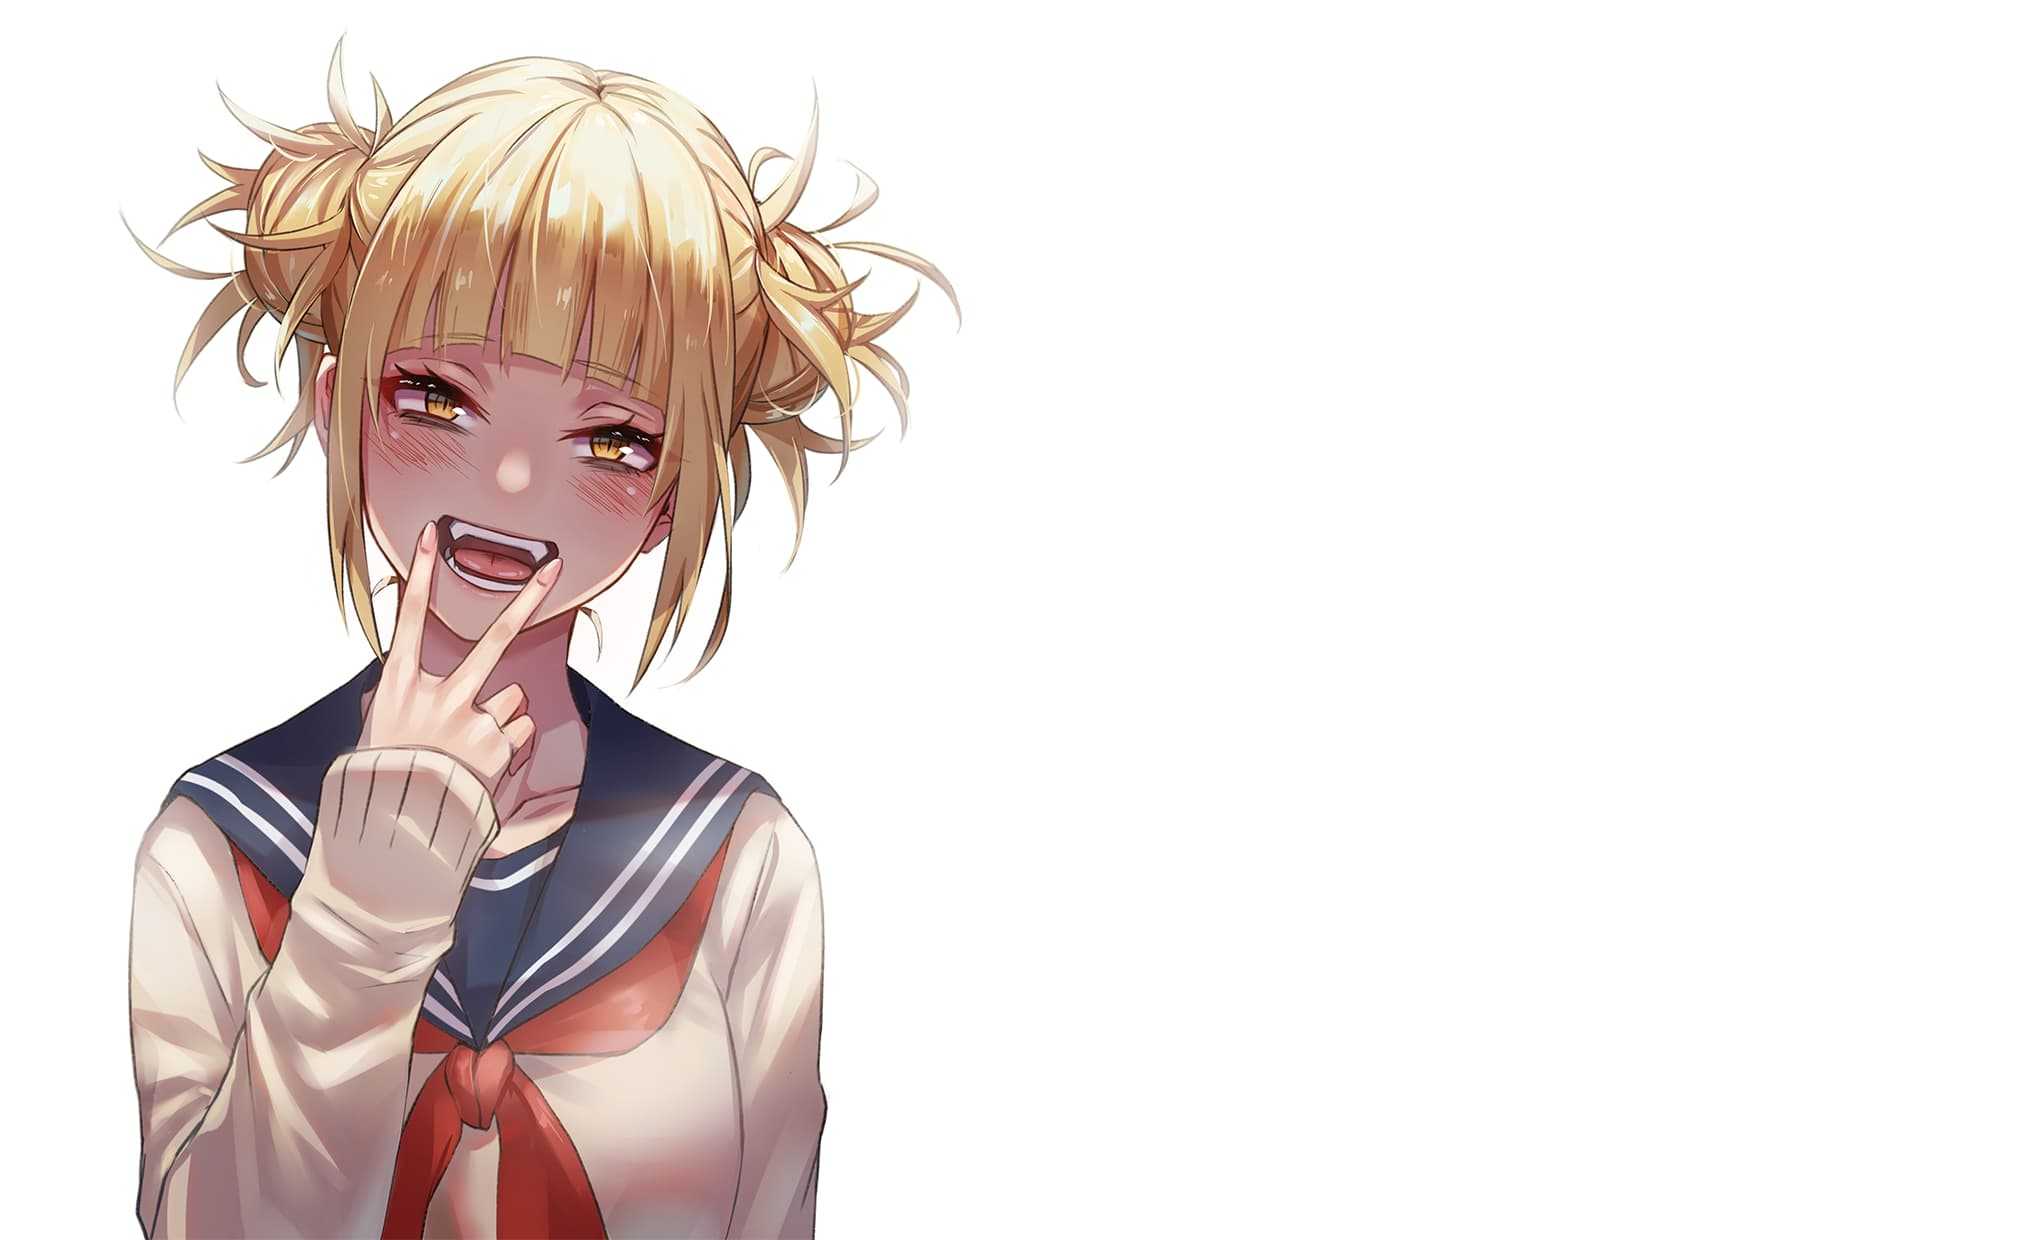 Himiko Toga Wallpapers Kolpaper Awesome Free Hd Wallpapers